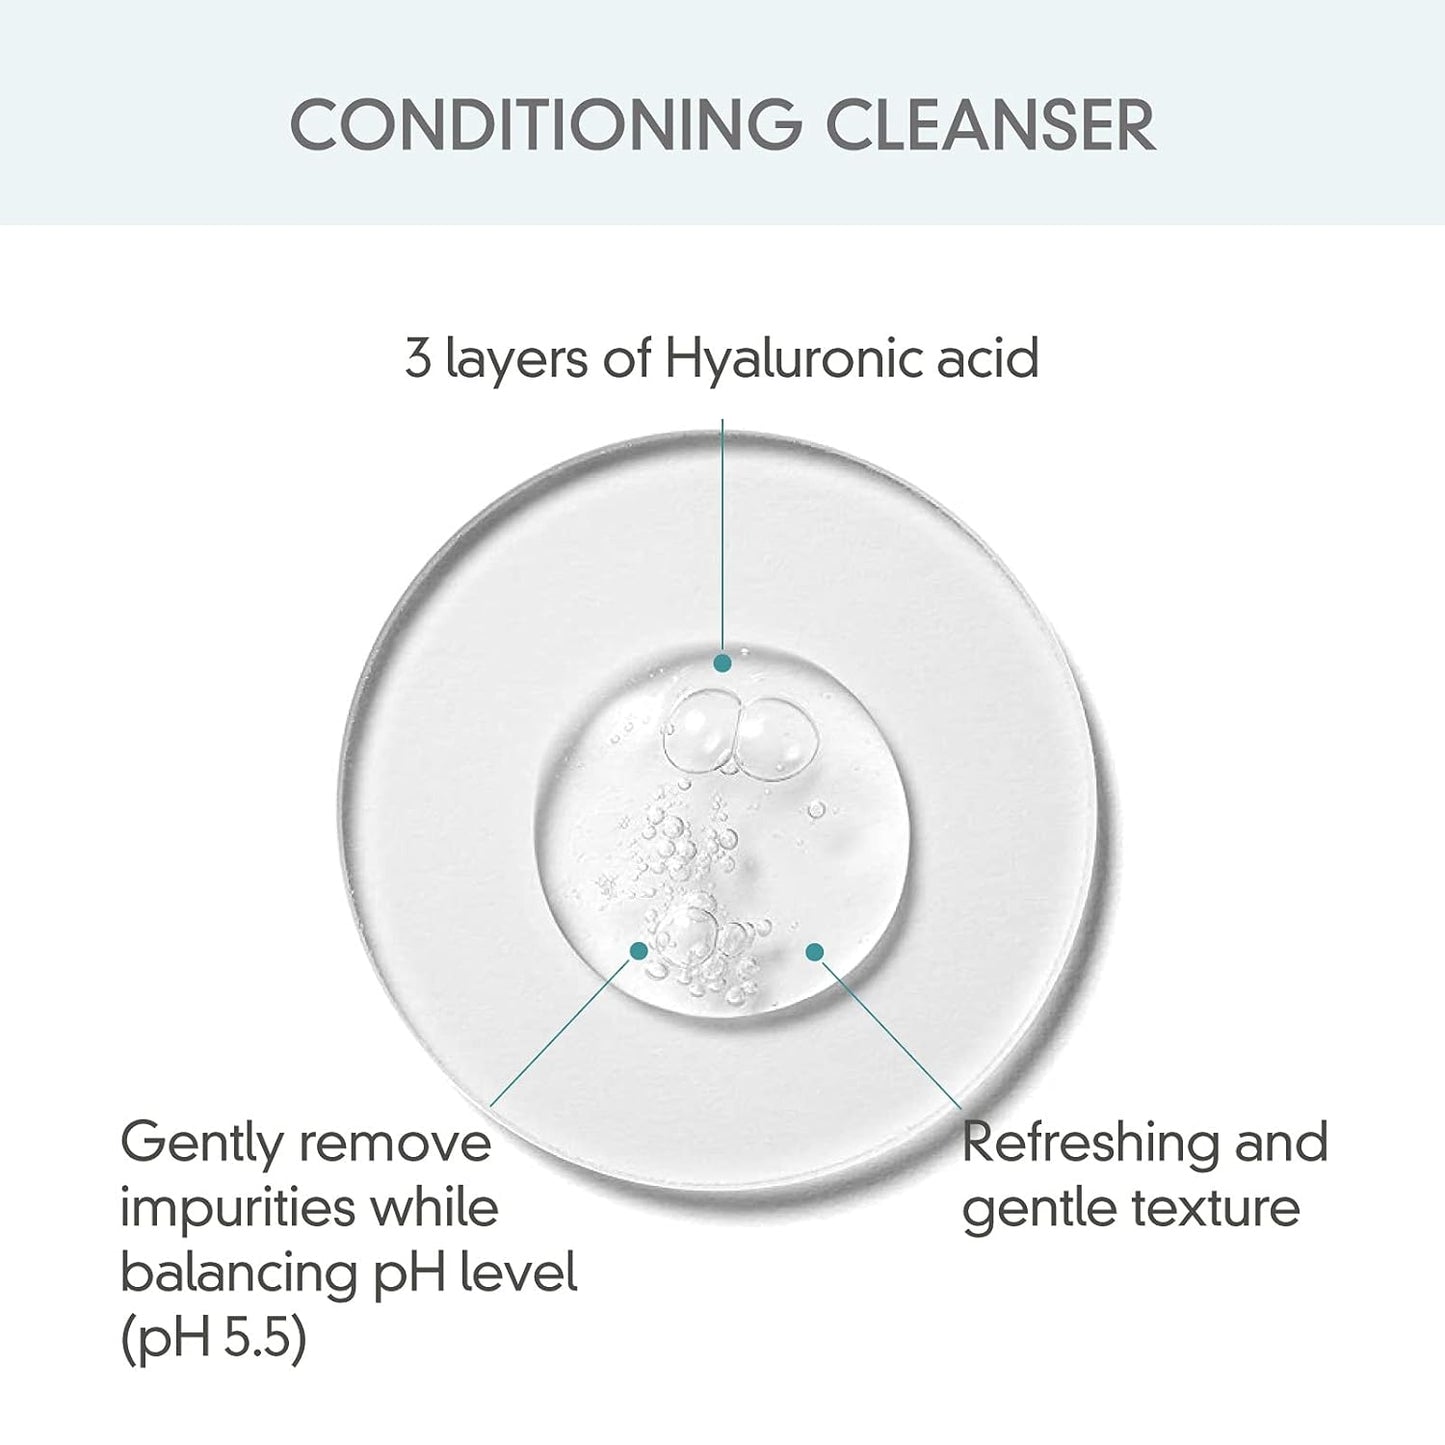 ROVECTIN Aqua Conditioning Cleanser from Rovectin